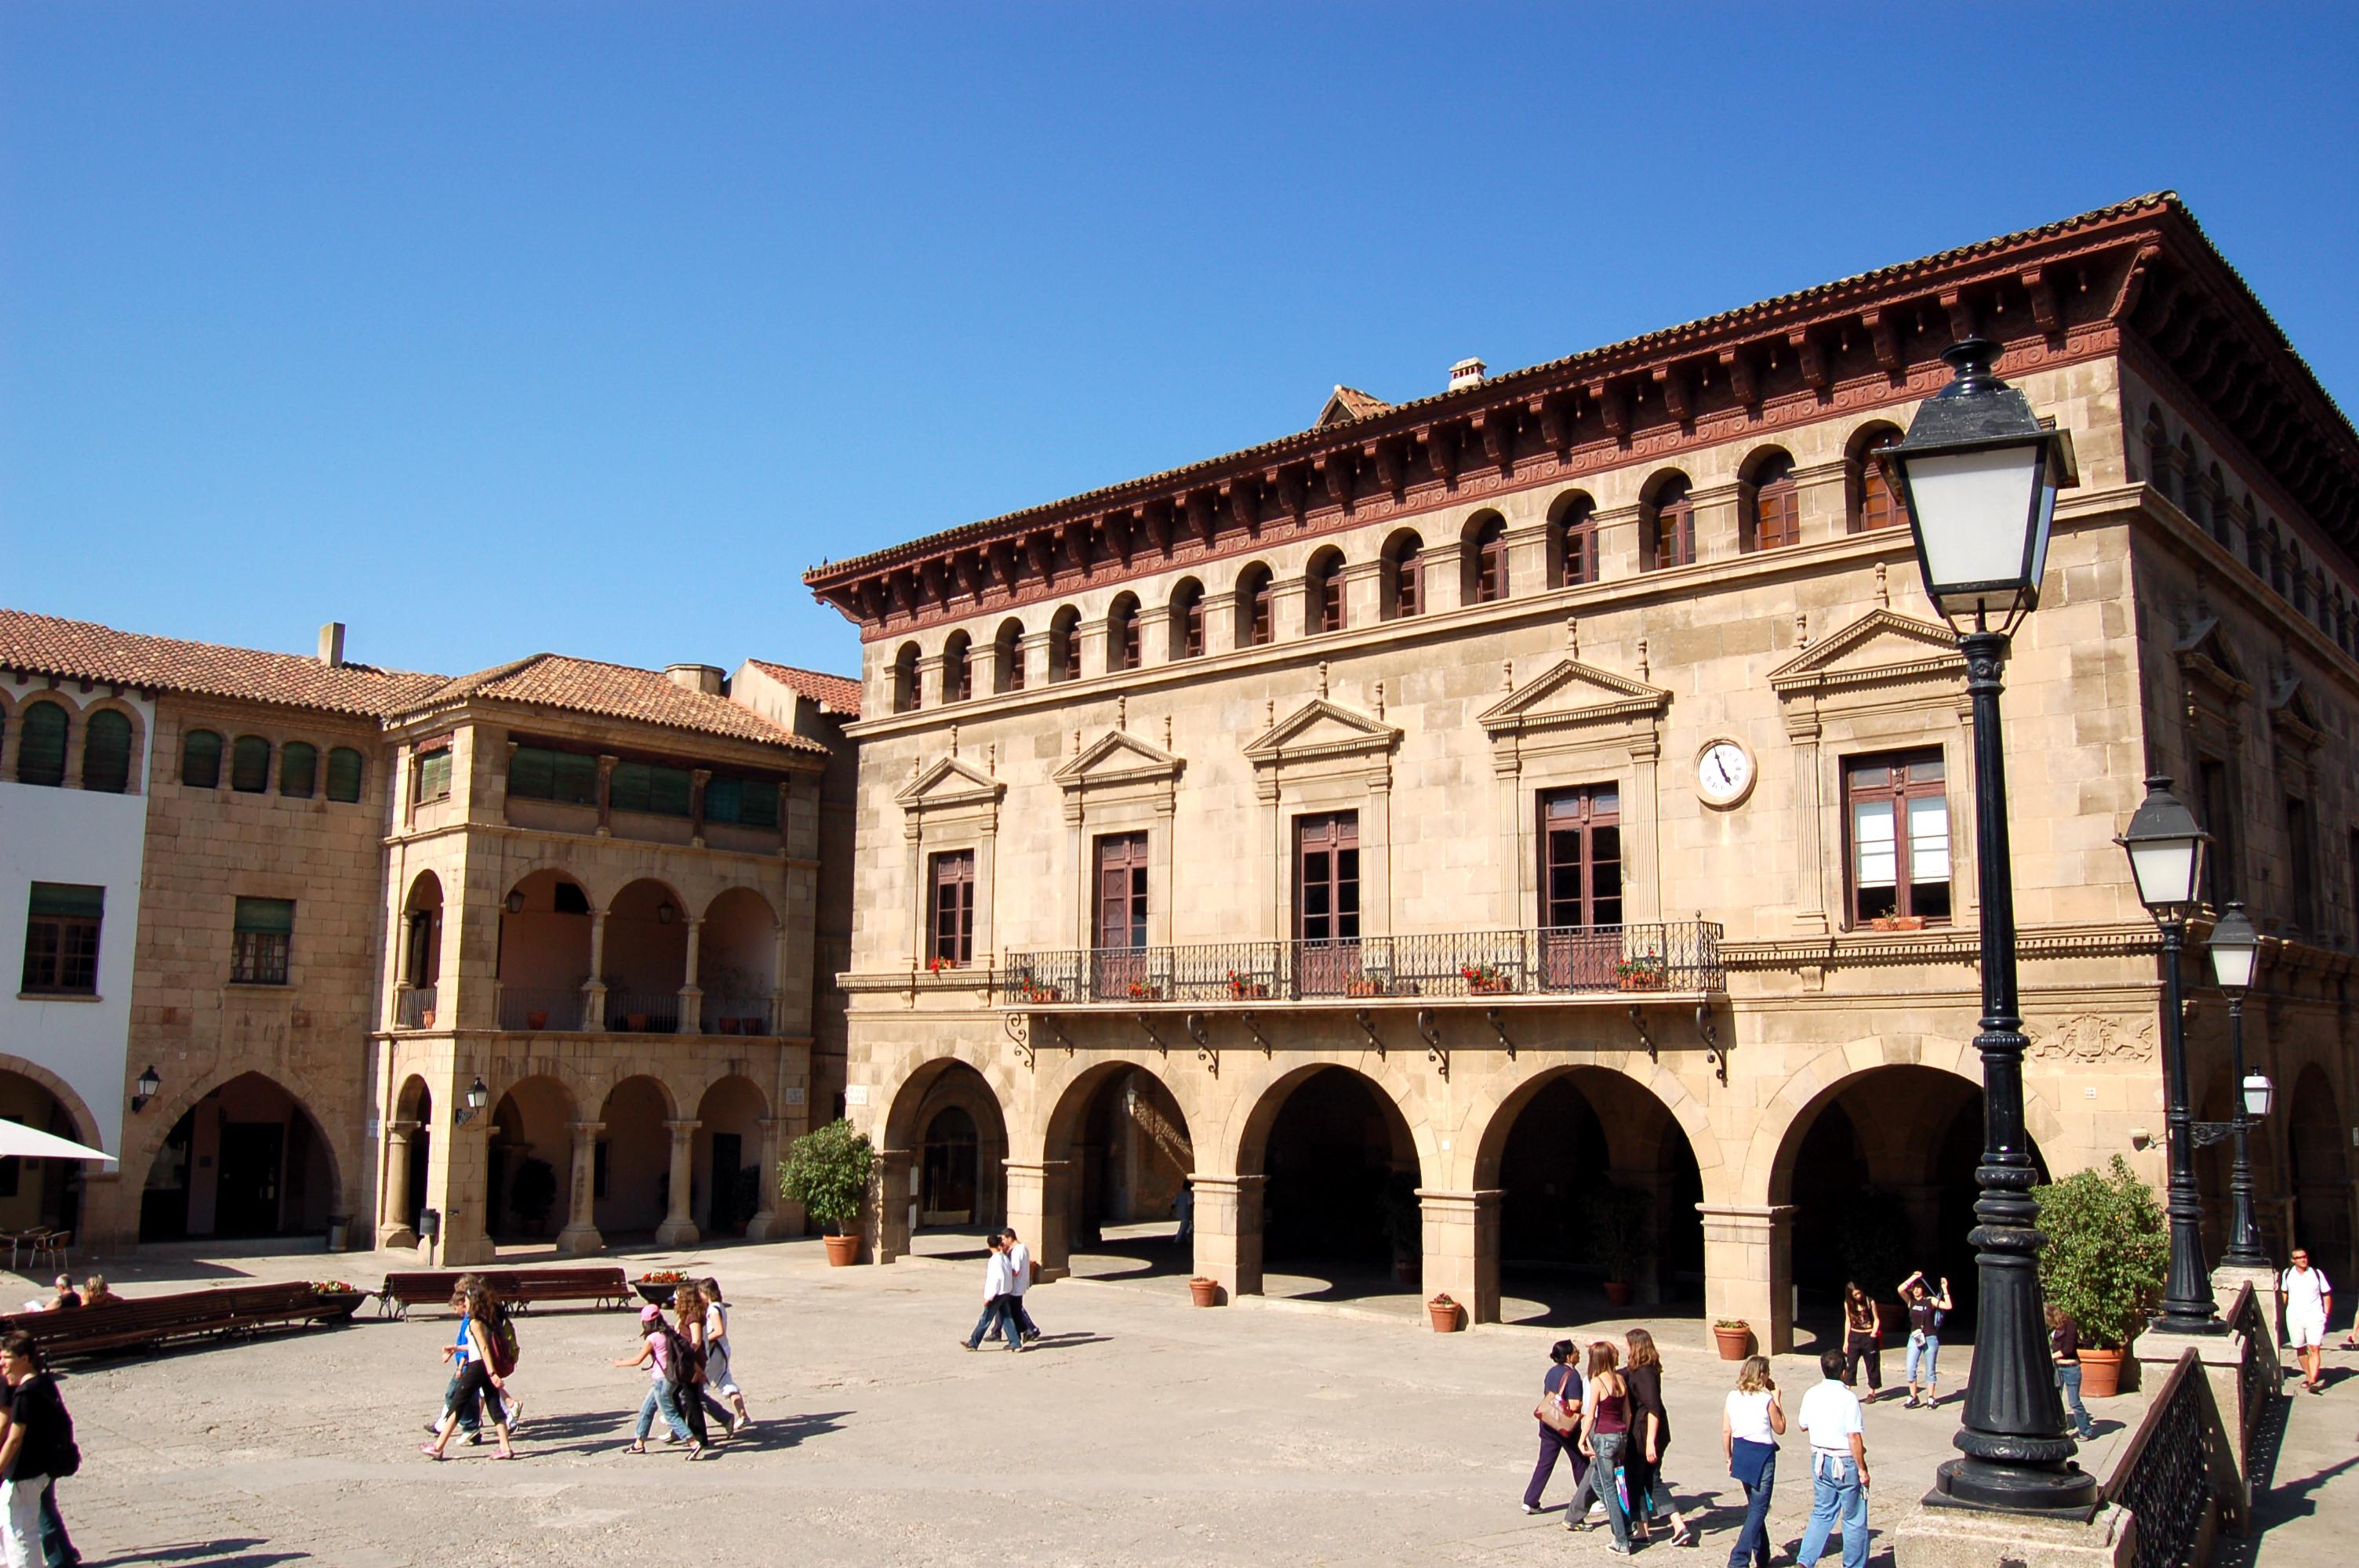 Cover image of this place Poble Espanyol